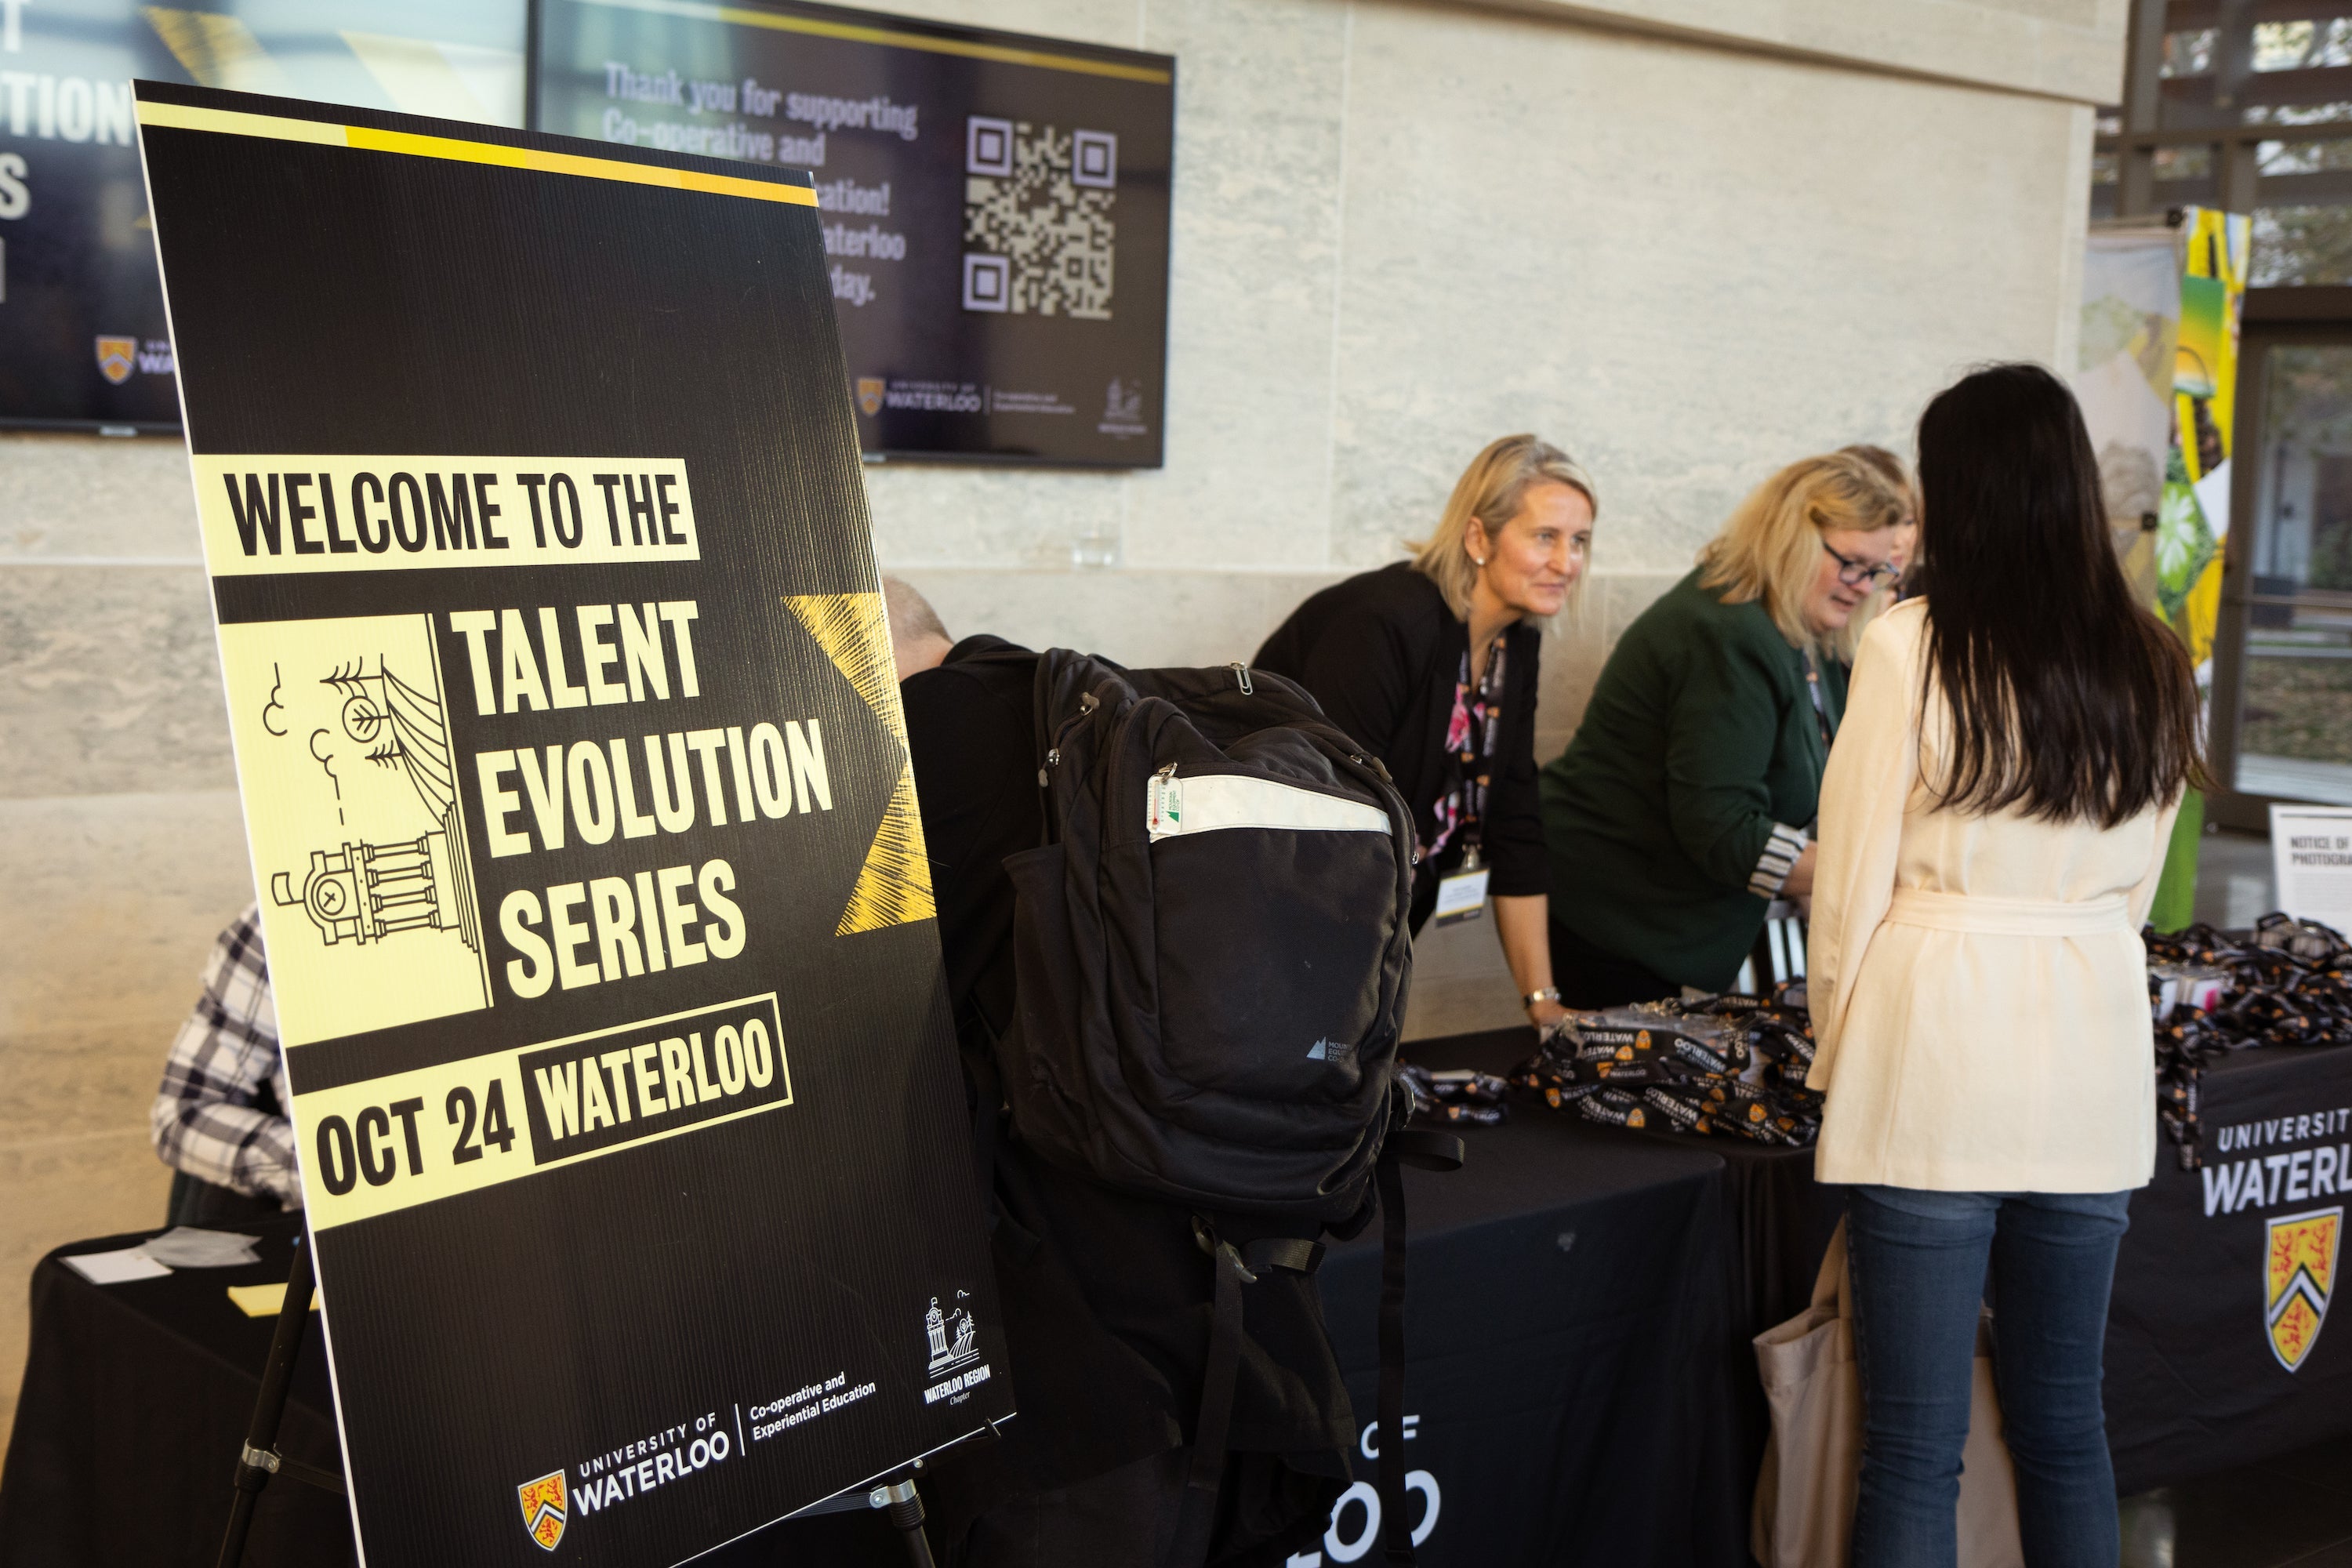 UWaterloo employees working at a booth next to Talent Evolution signage